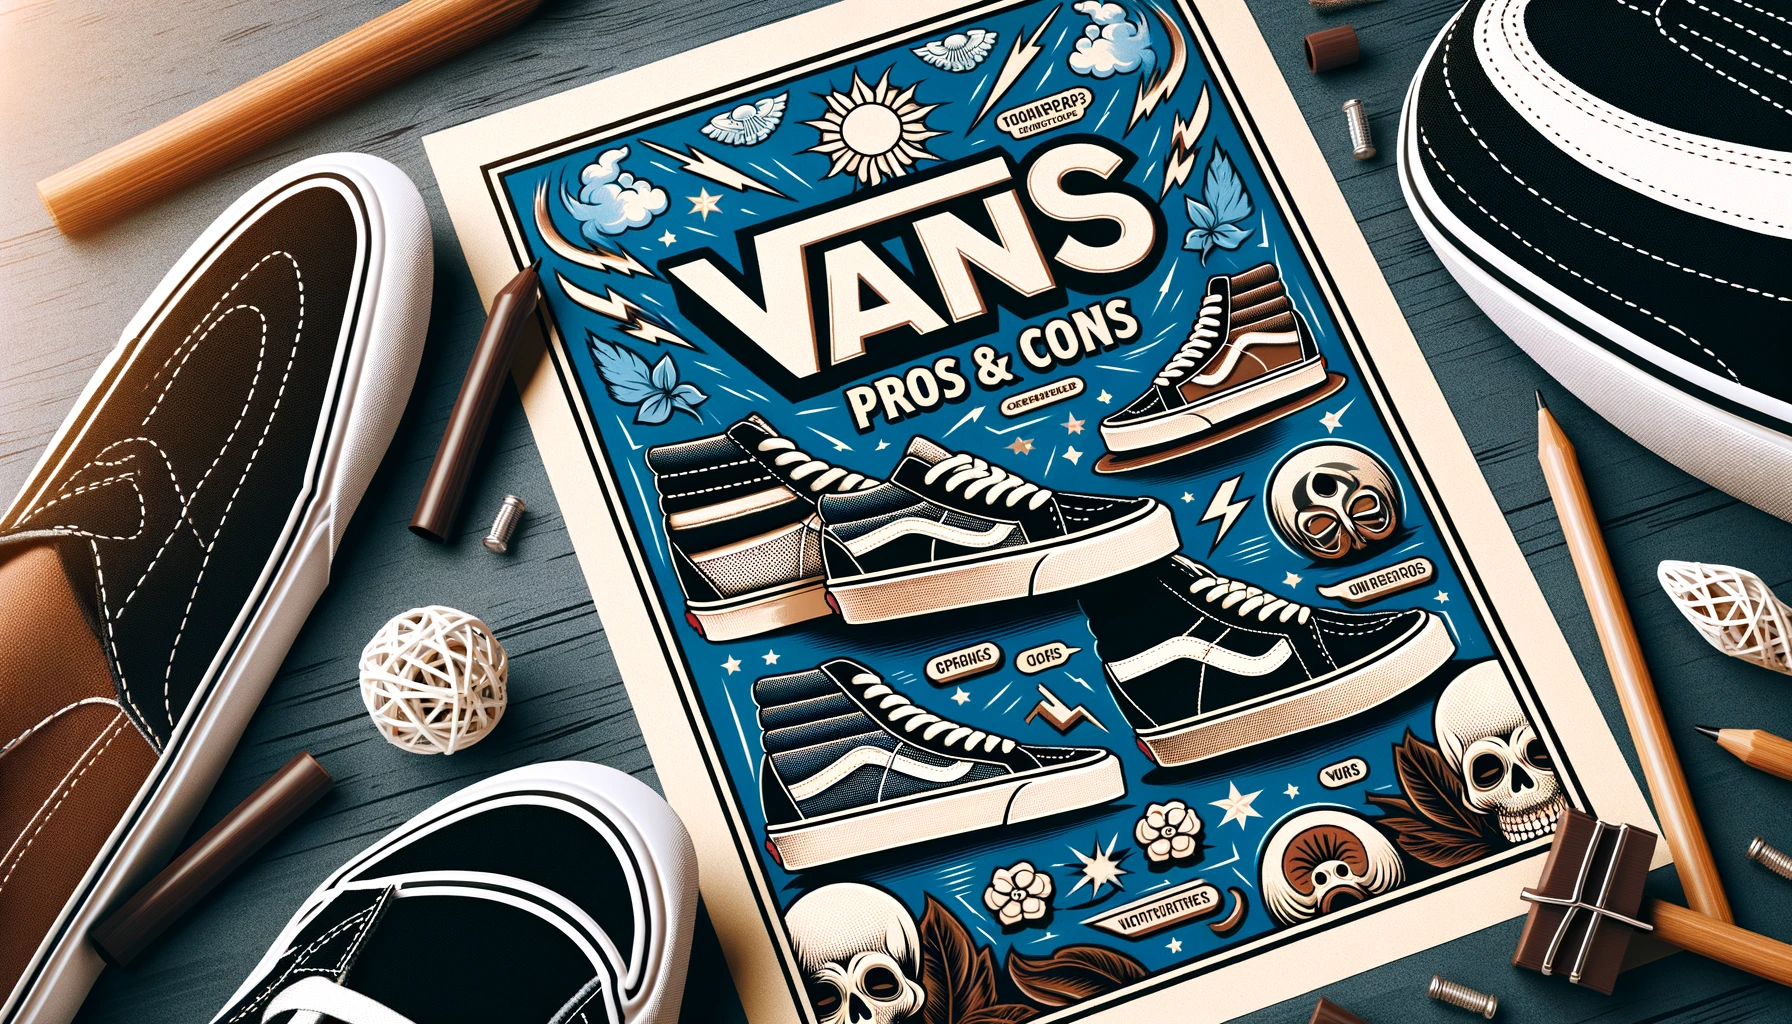 An image showing the pros and cons of VANS shoes, with a stylish background, featuring the text 'VANS' prominently.